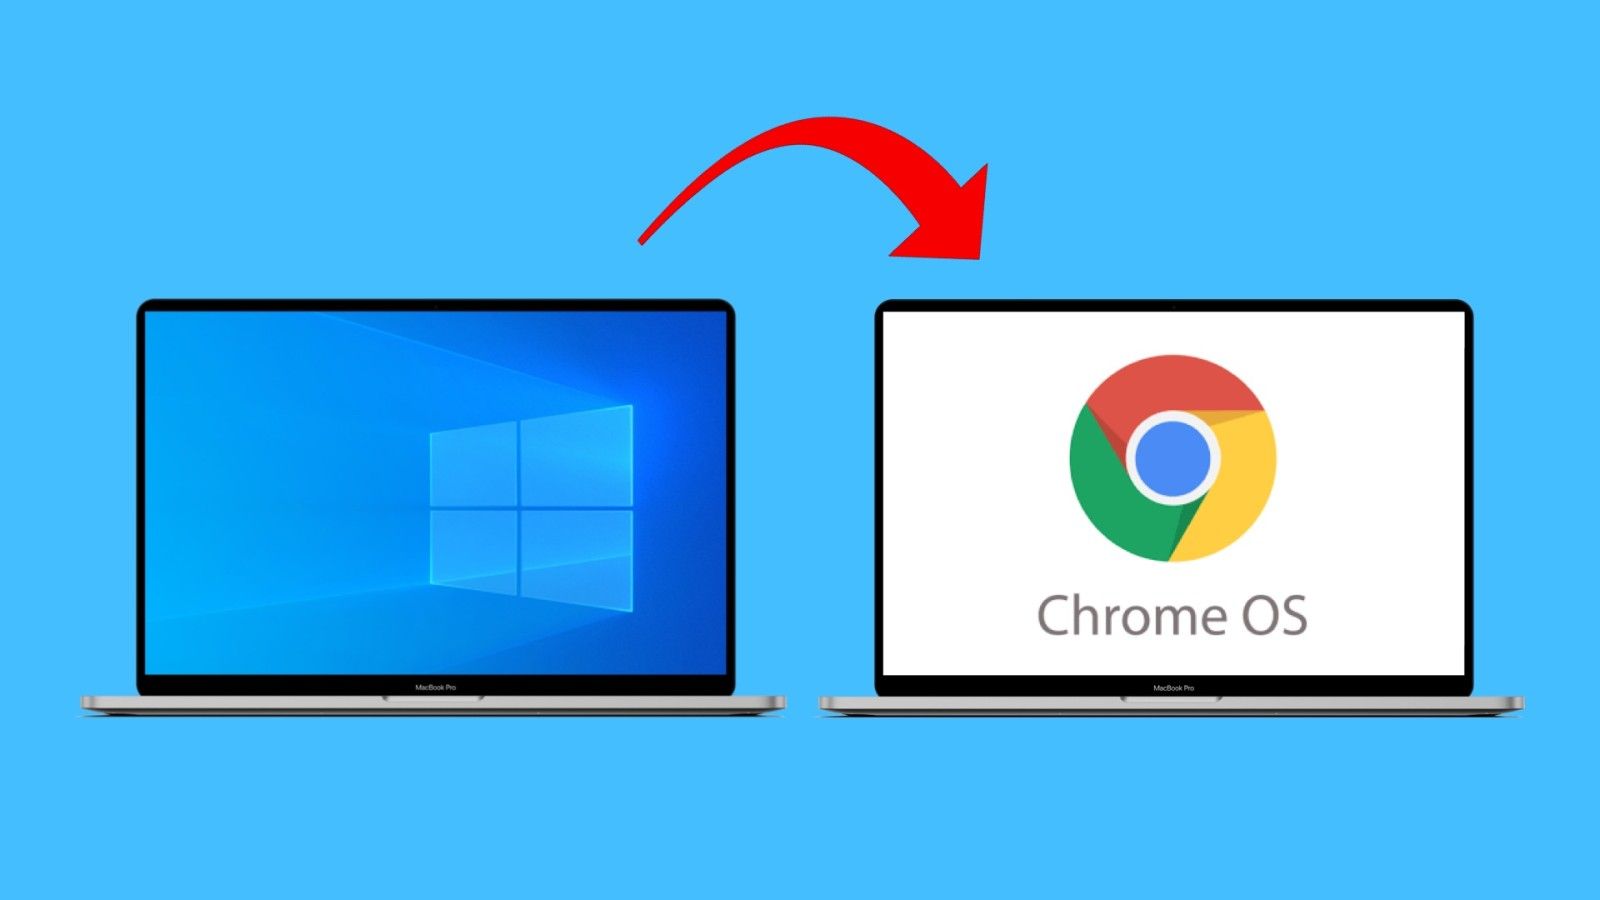 how to install chrome on macbook